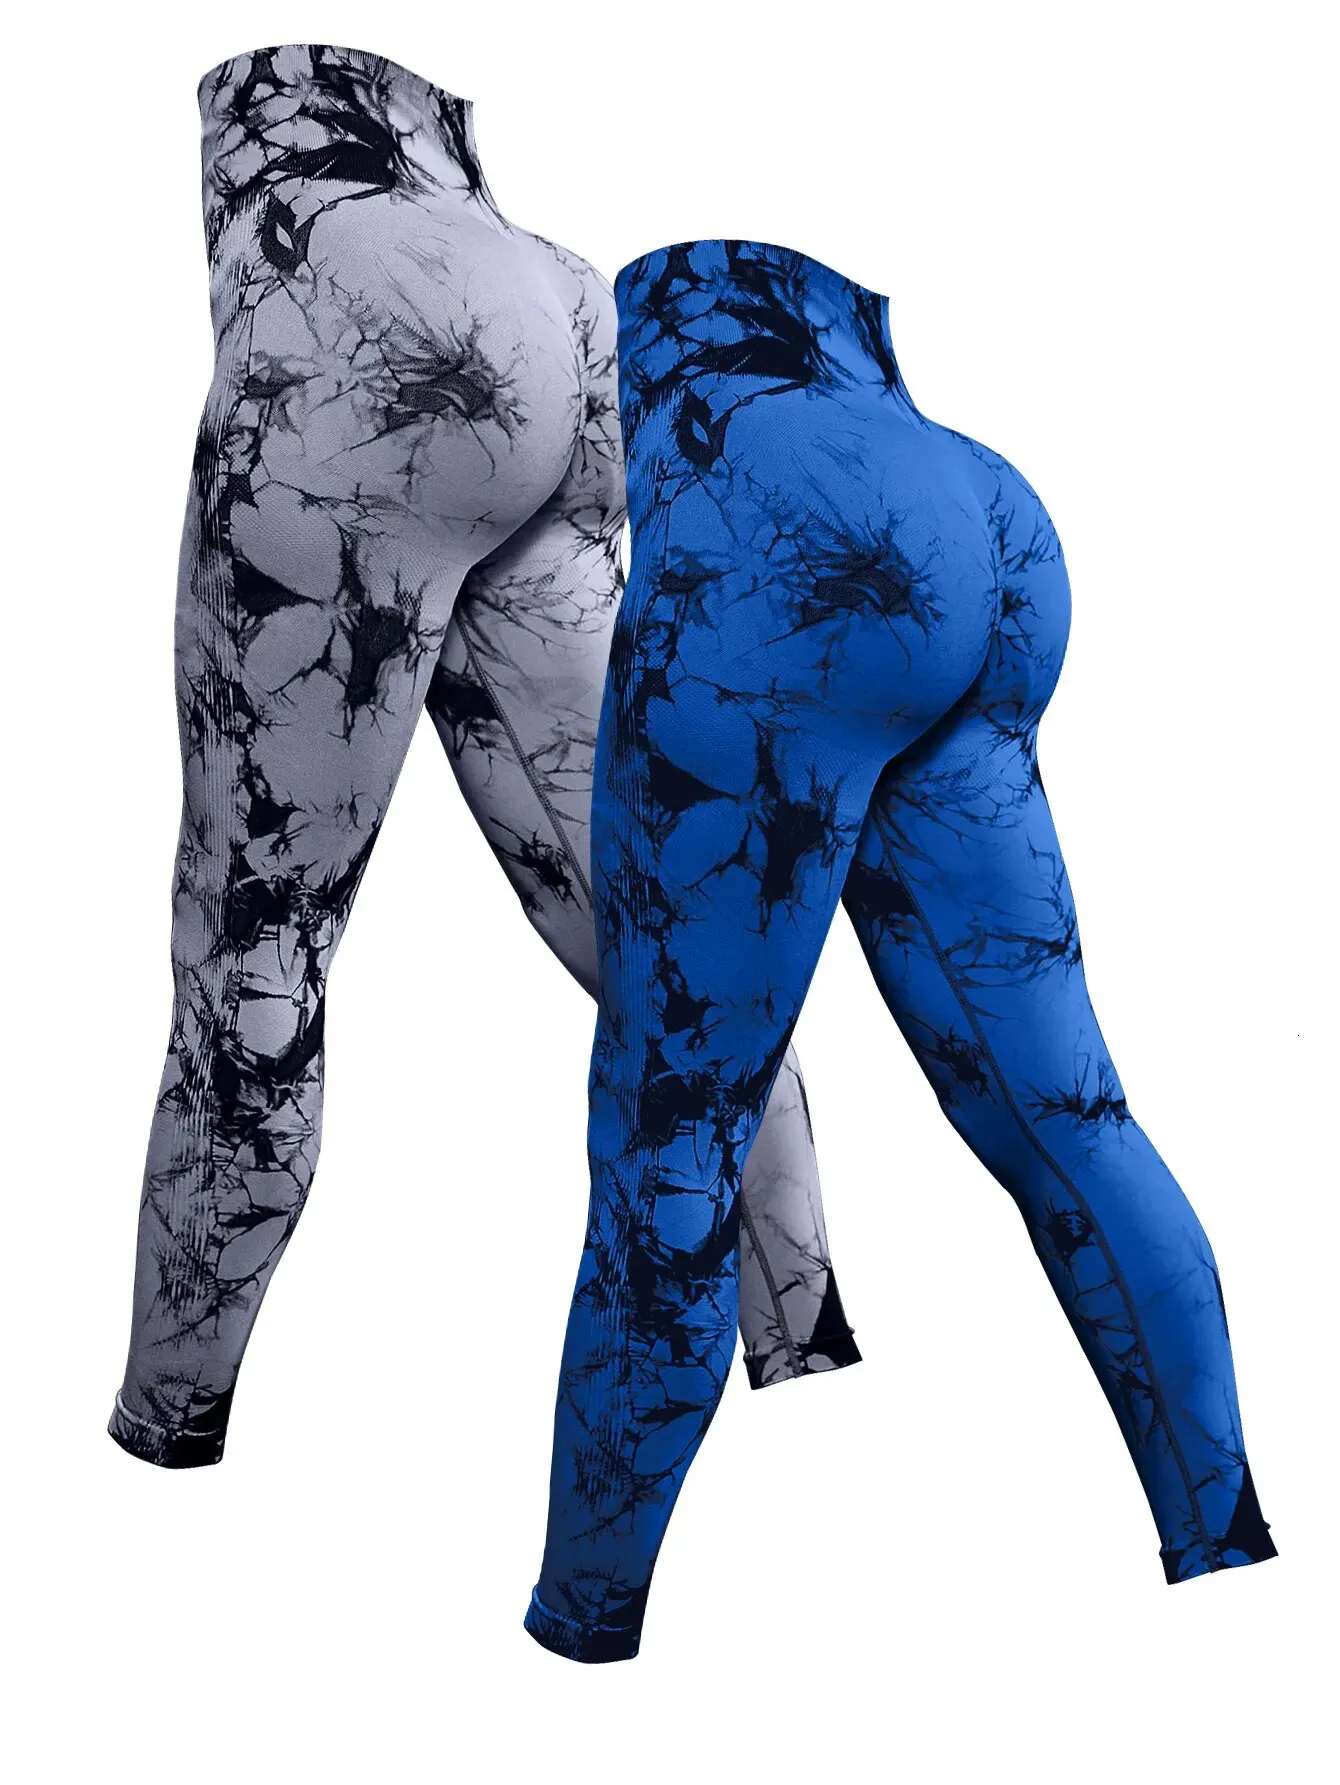 High Waist Tie Dye Yoga Leggings Seamless Push Up Pants For Womens Fitness  And Workout Seamless Gym Leggings From Jin007, $9.54